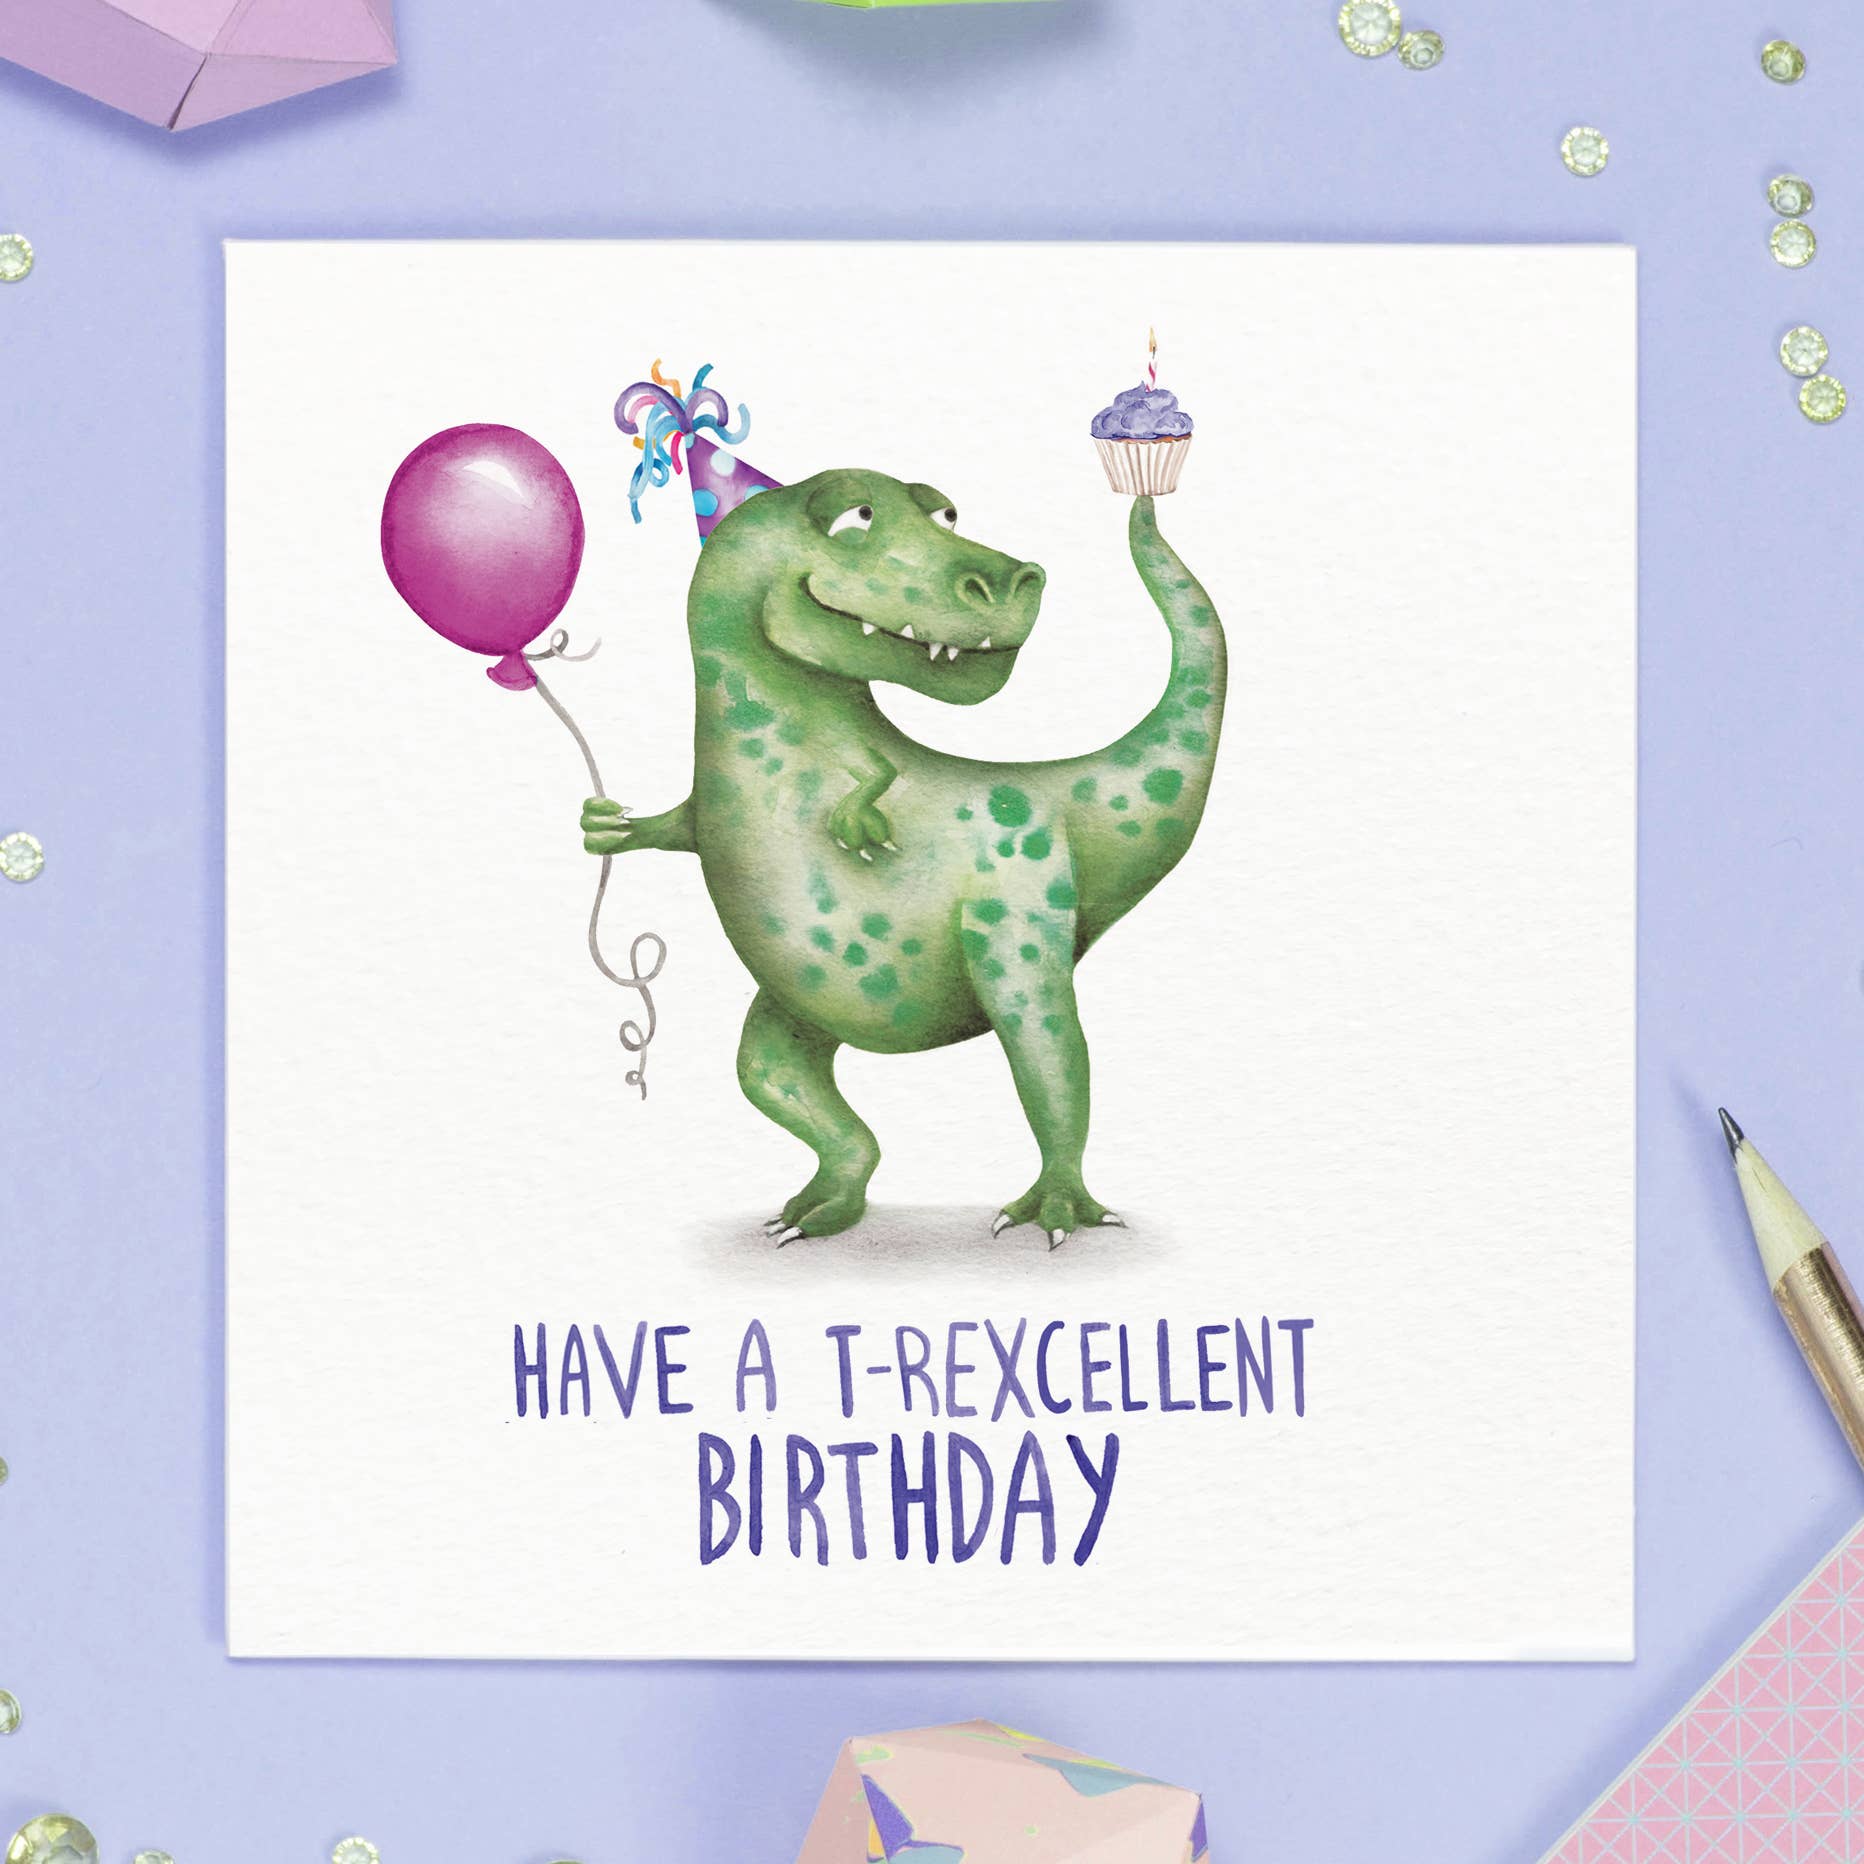 Greeting card "T-rexcellent Birthday" -. Fairy Positron